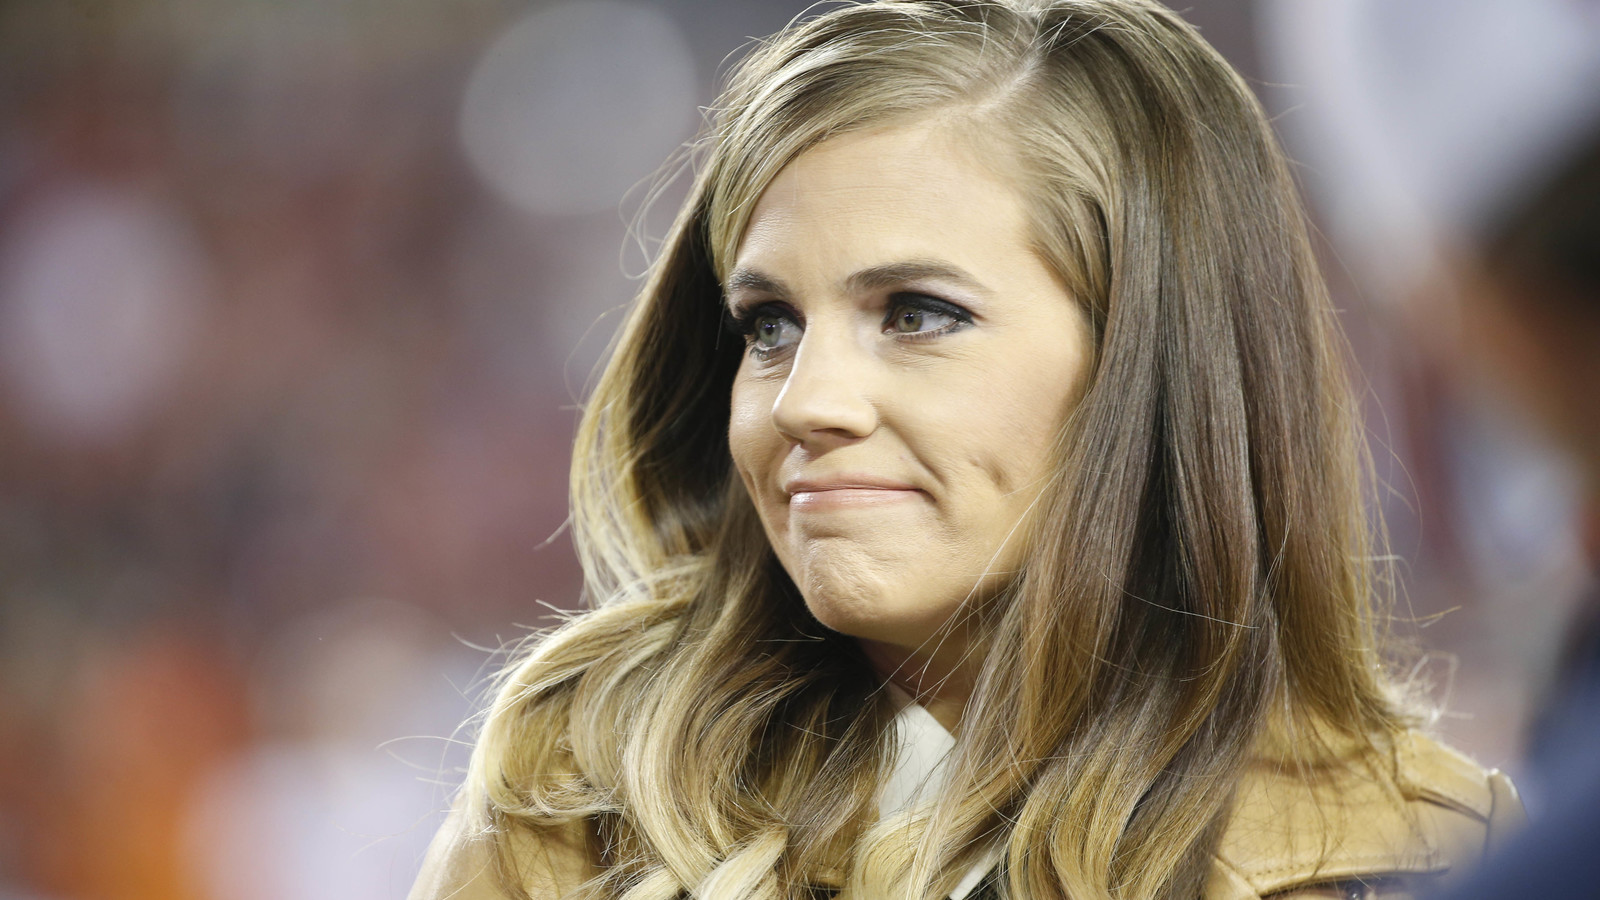 Sam Ponder admits she has been ‘immature’ after uncovering of old tweets | Yardbarker